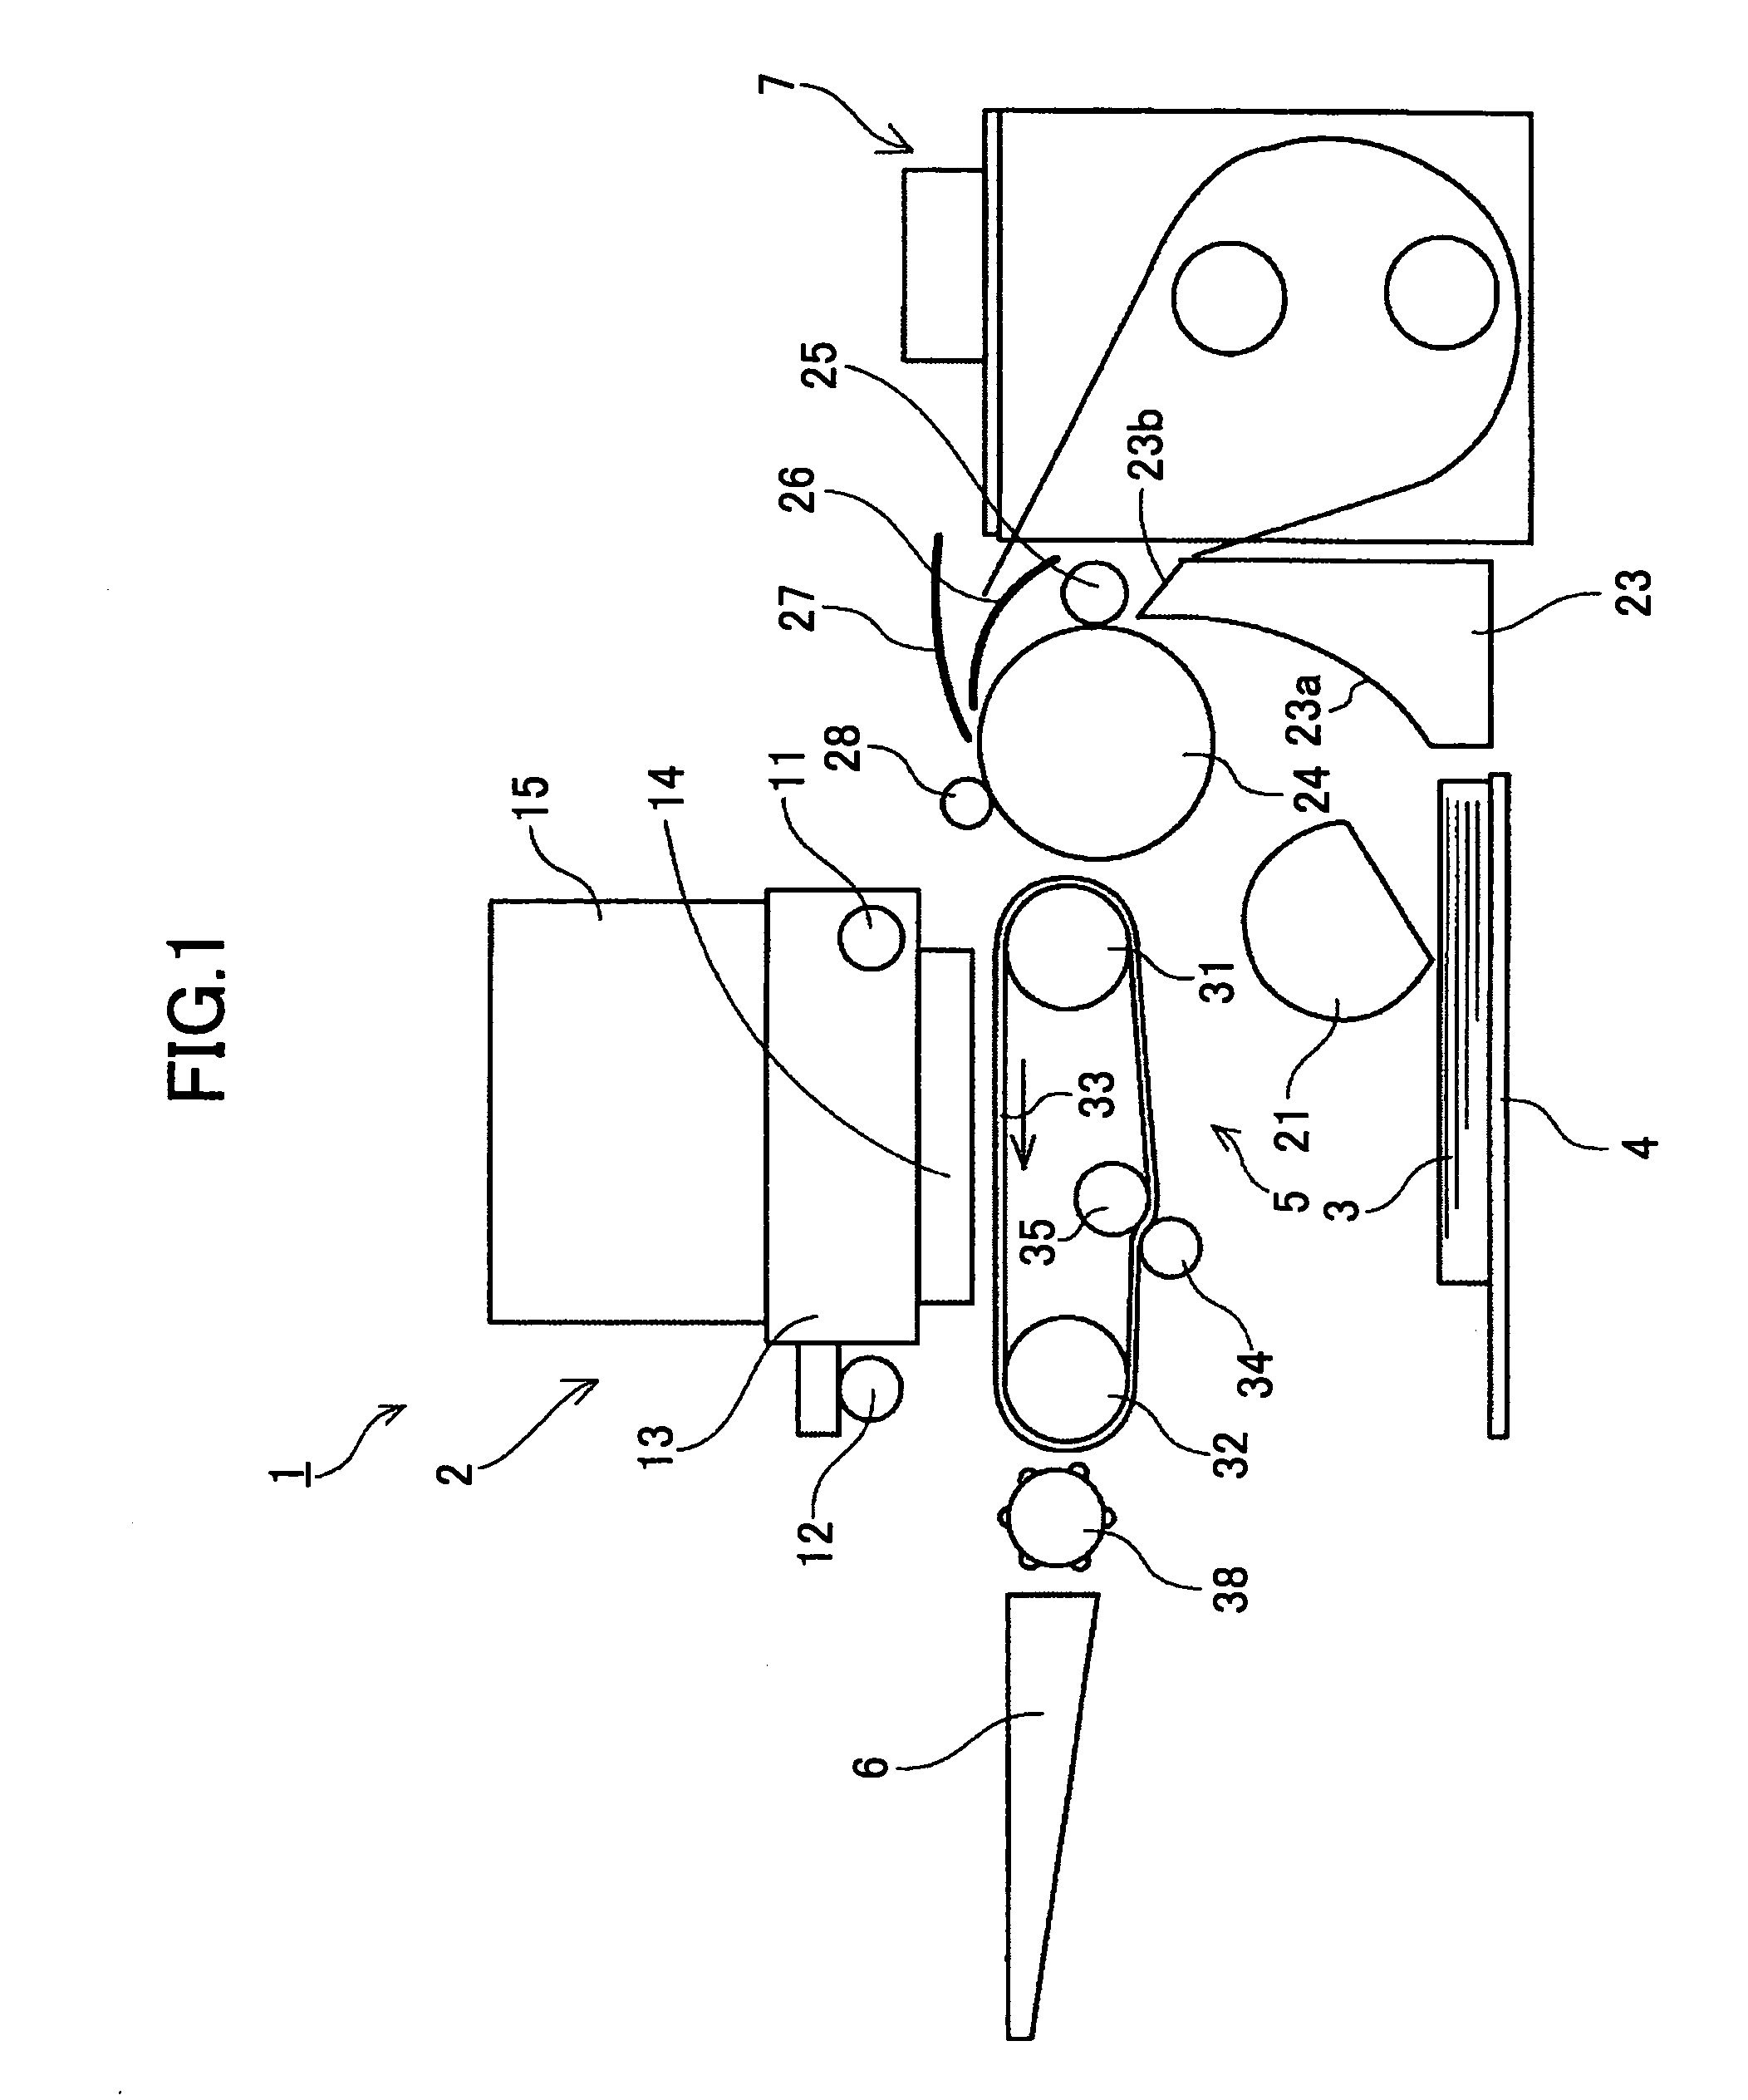 Image processing method, program and apparatus having plural halftoning methods including error diffusion using a larger number of bits